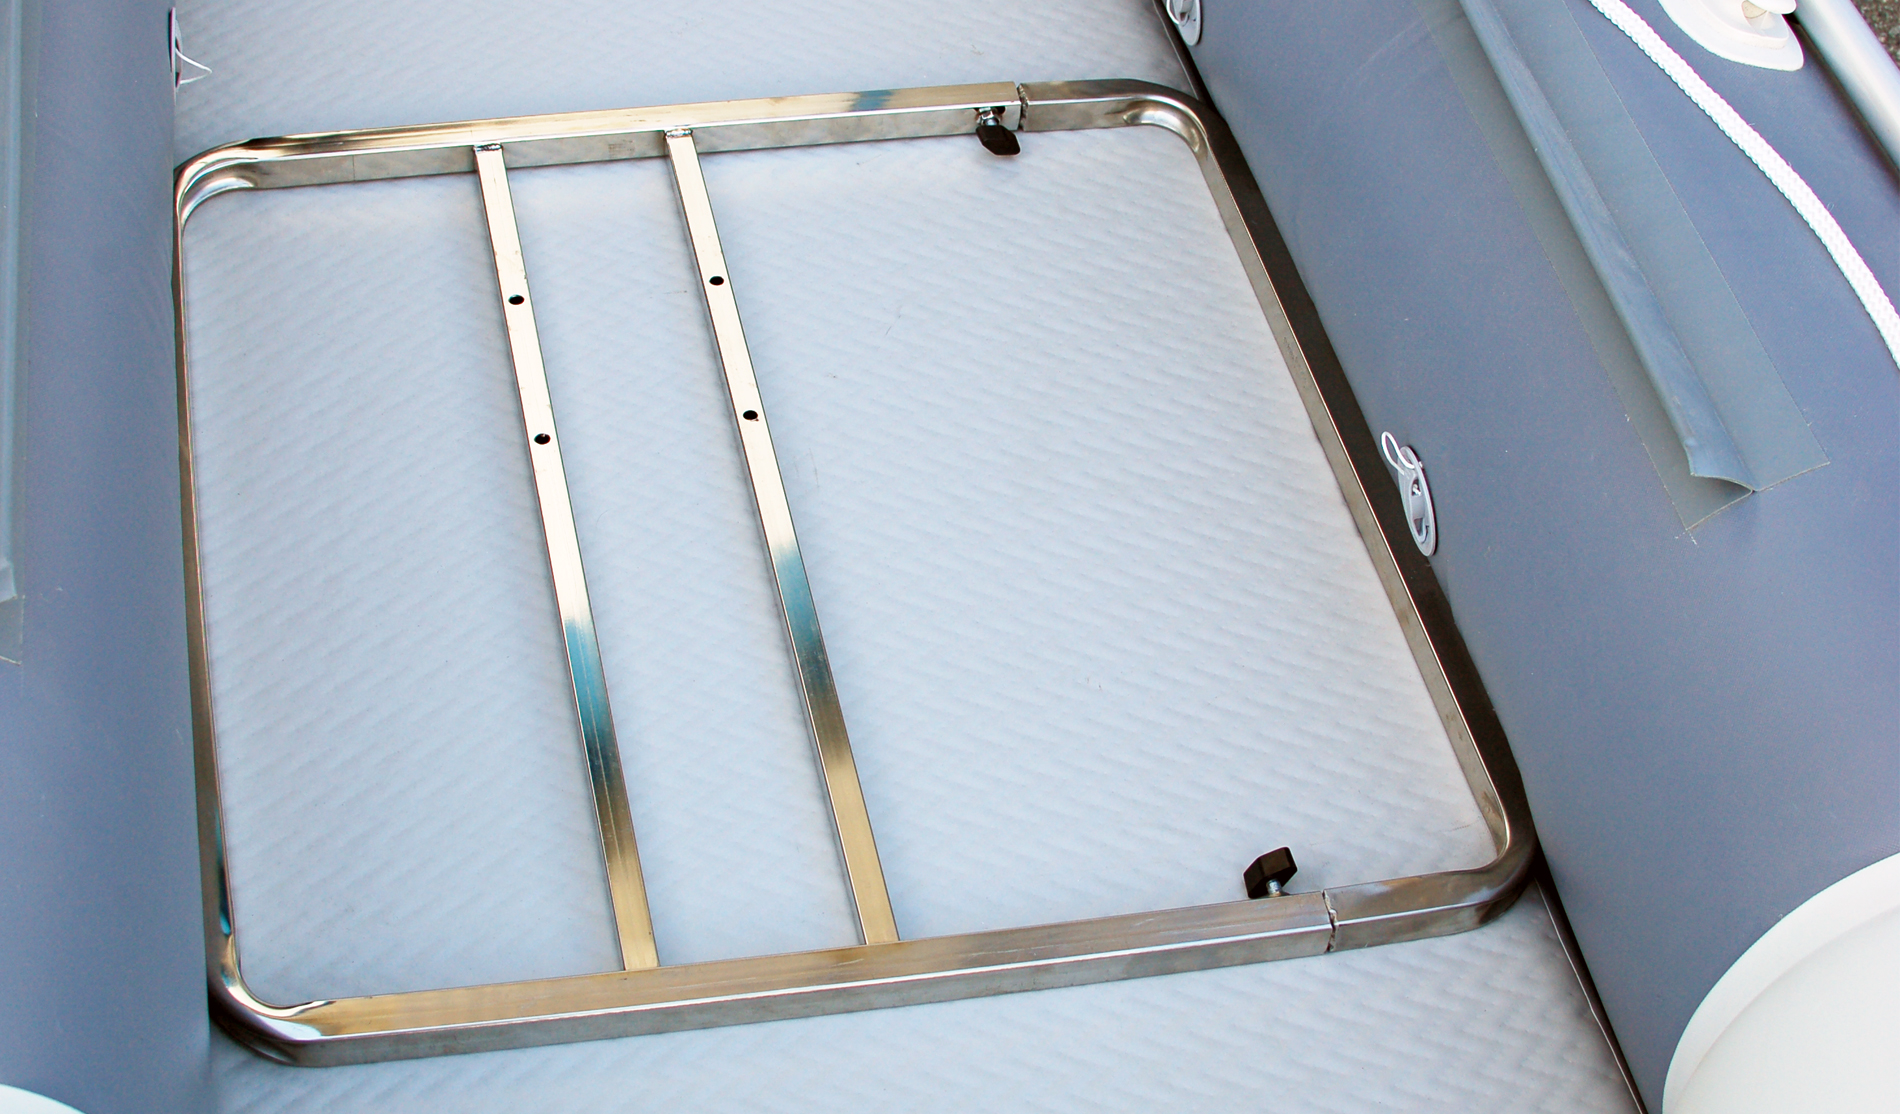 Inflatable Boat seating base frame Stainless